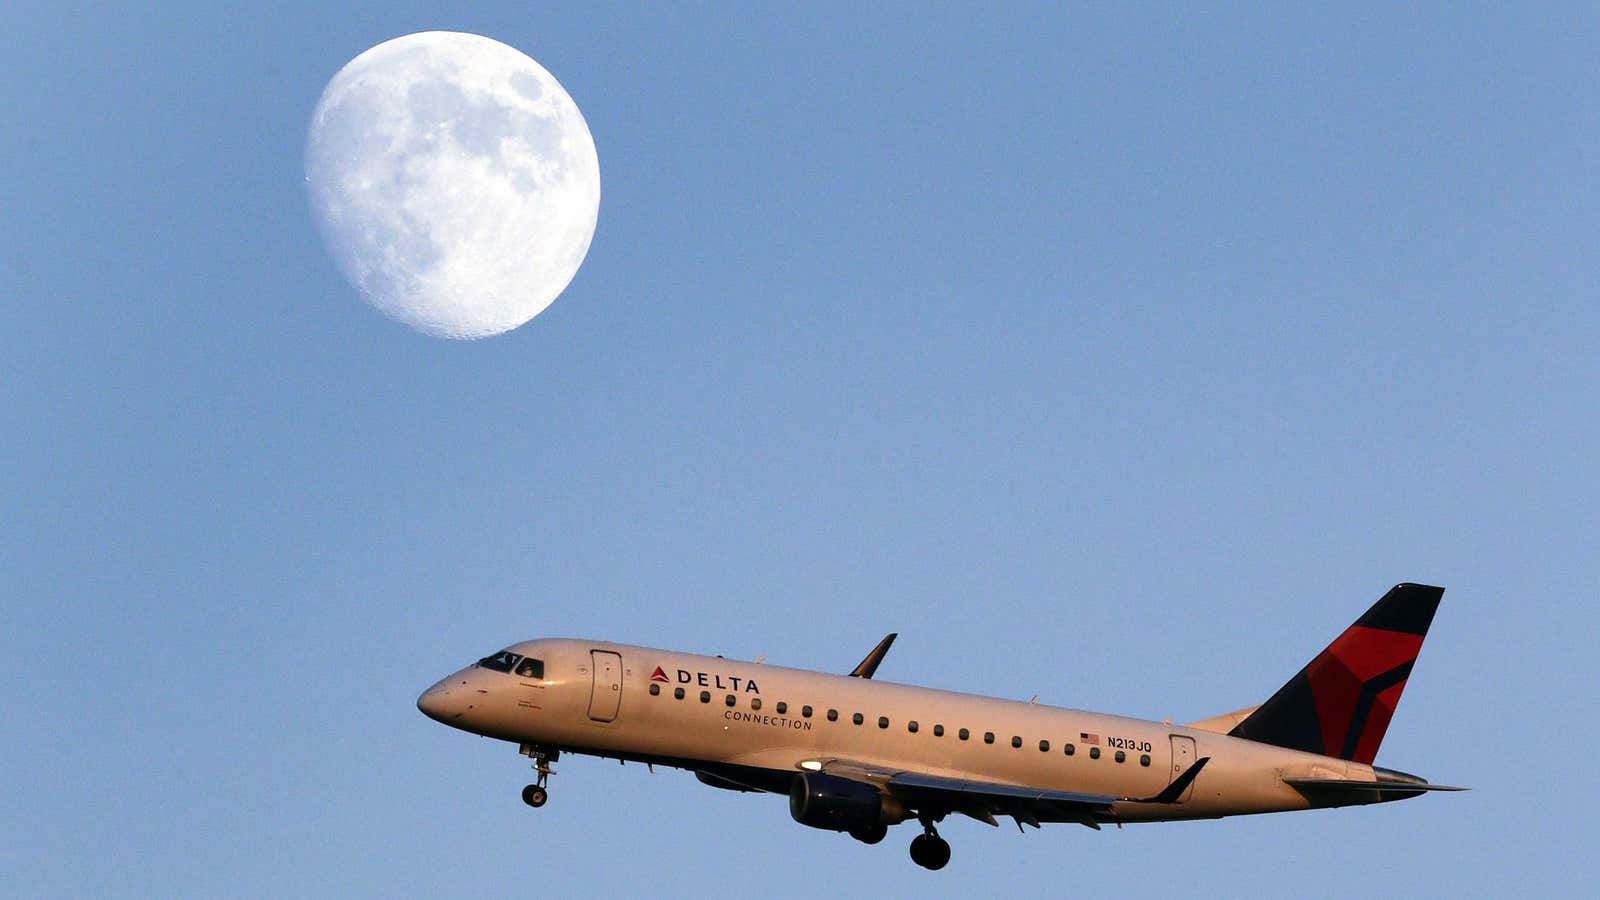 Delta Air Lines is promising the moon on the environment.